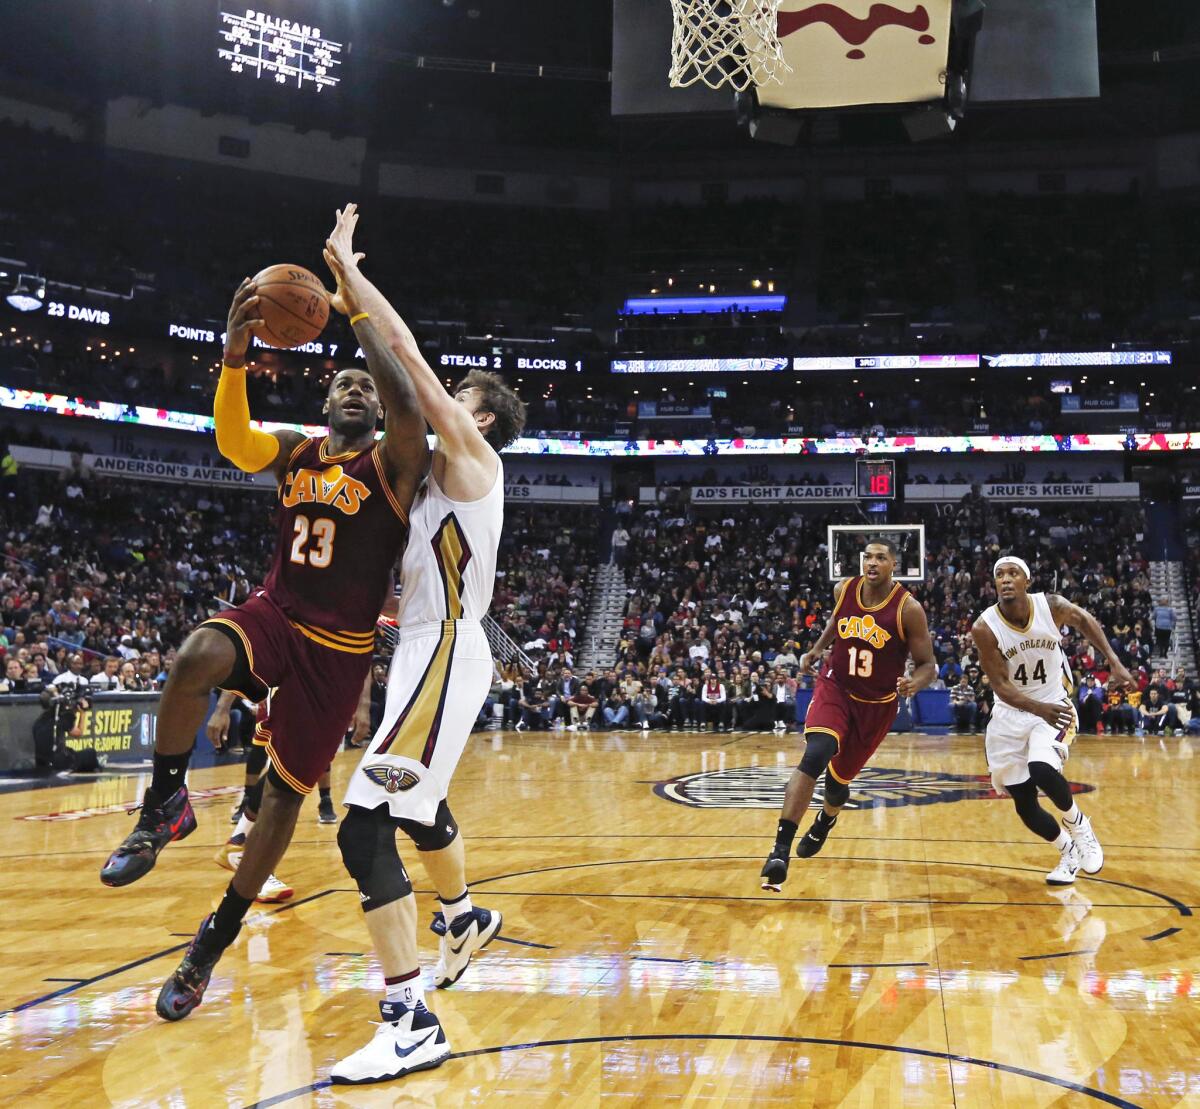 Cleveland Cavaliers forward LeBron James drives to the basket against New Orleans Pelicans center Omer Asik during the second half of a game on Dec. 4.